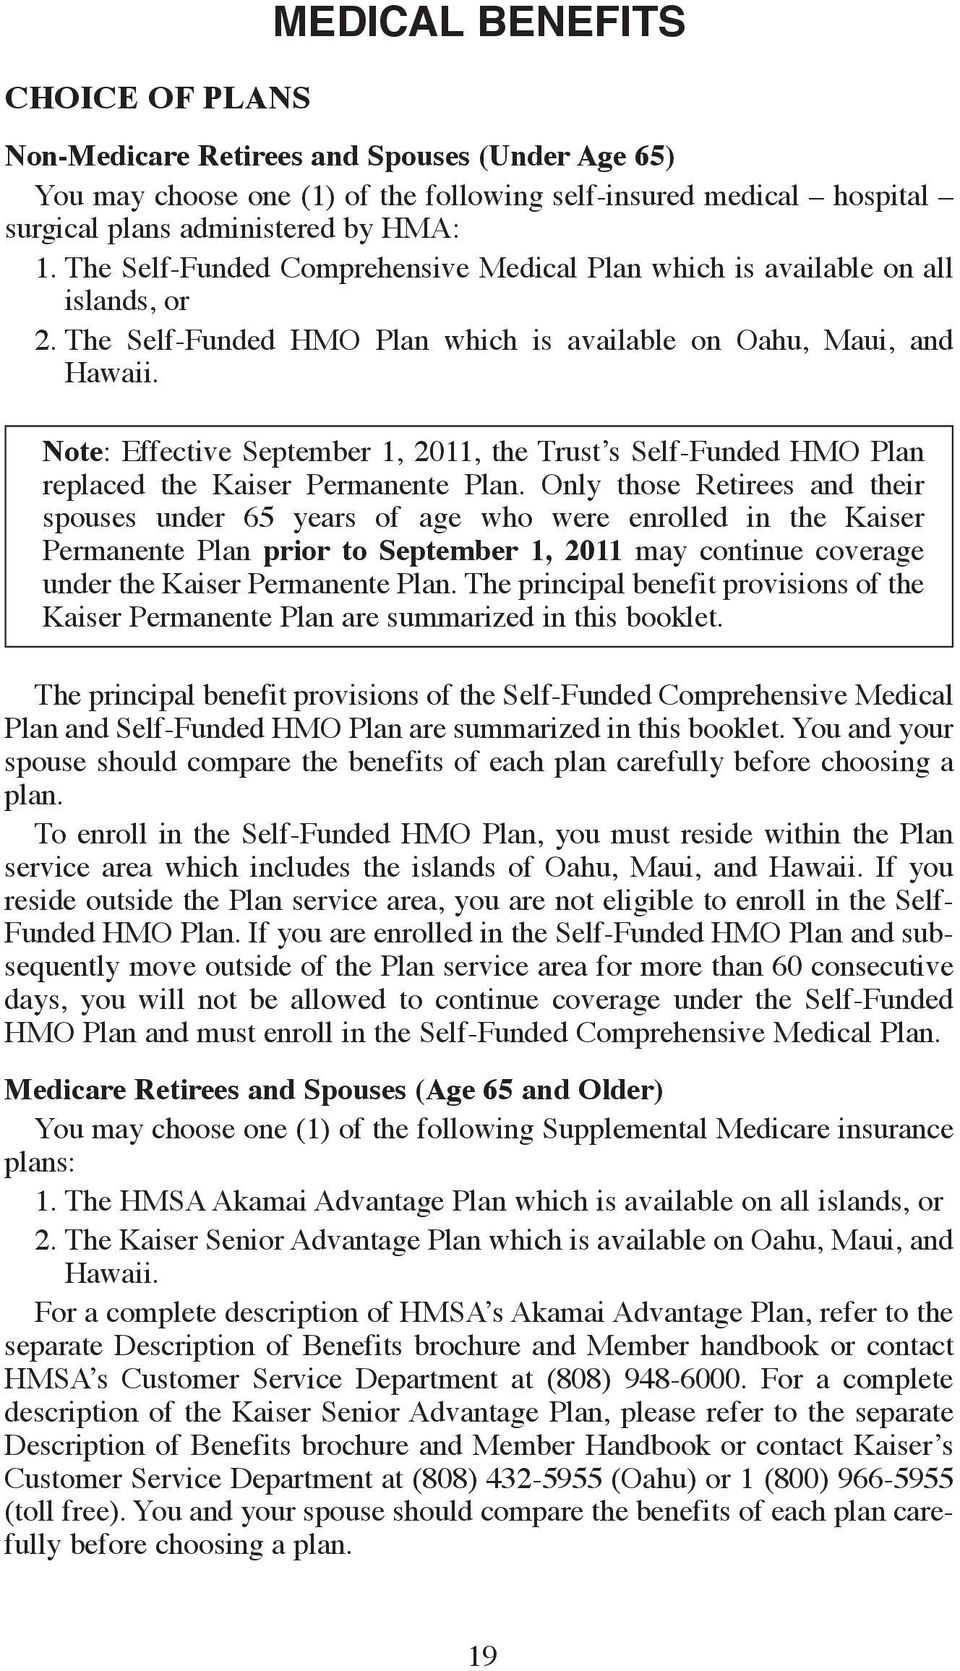 Note: Effective September 1, 2011, the Trust s Self-Funded HMO Plan replaced the Kaiser Permanente Plan.